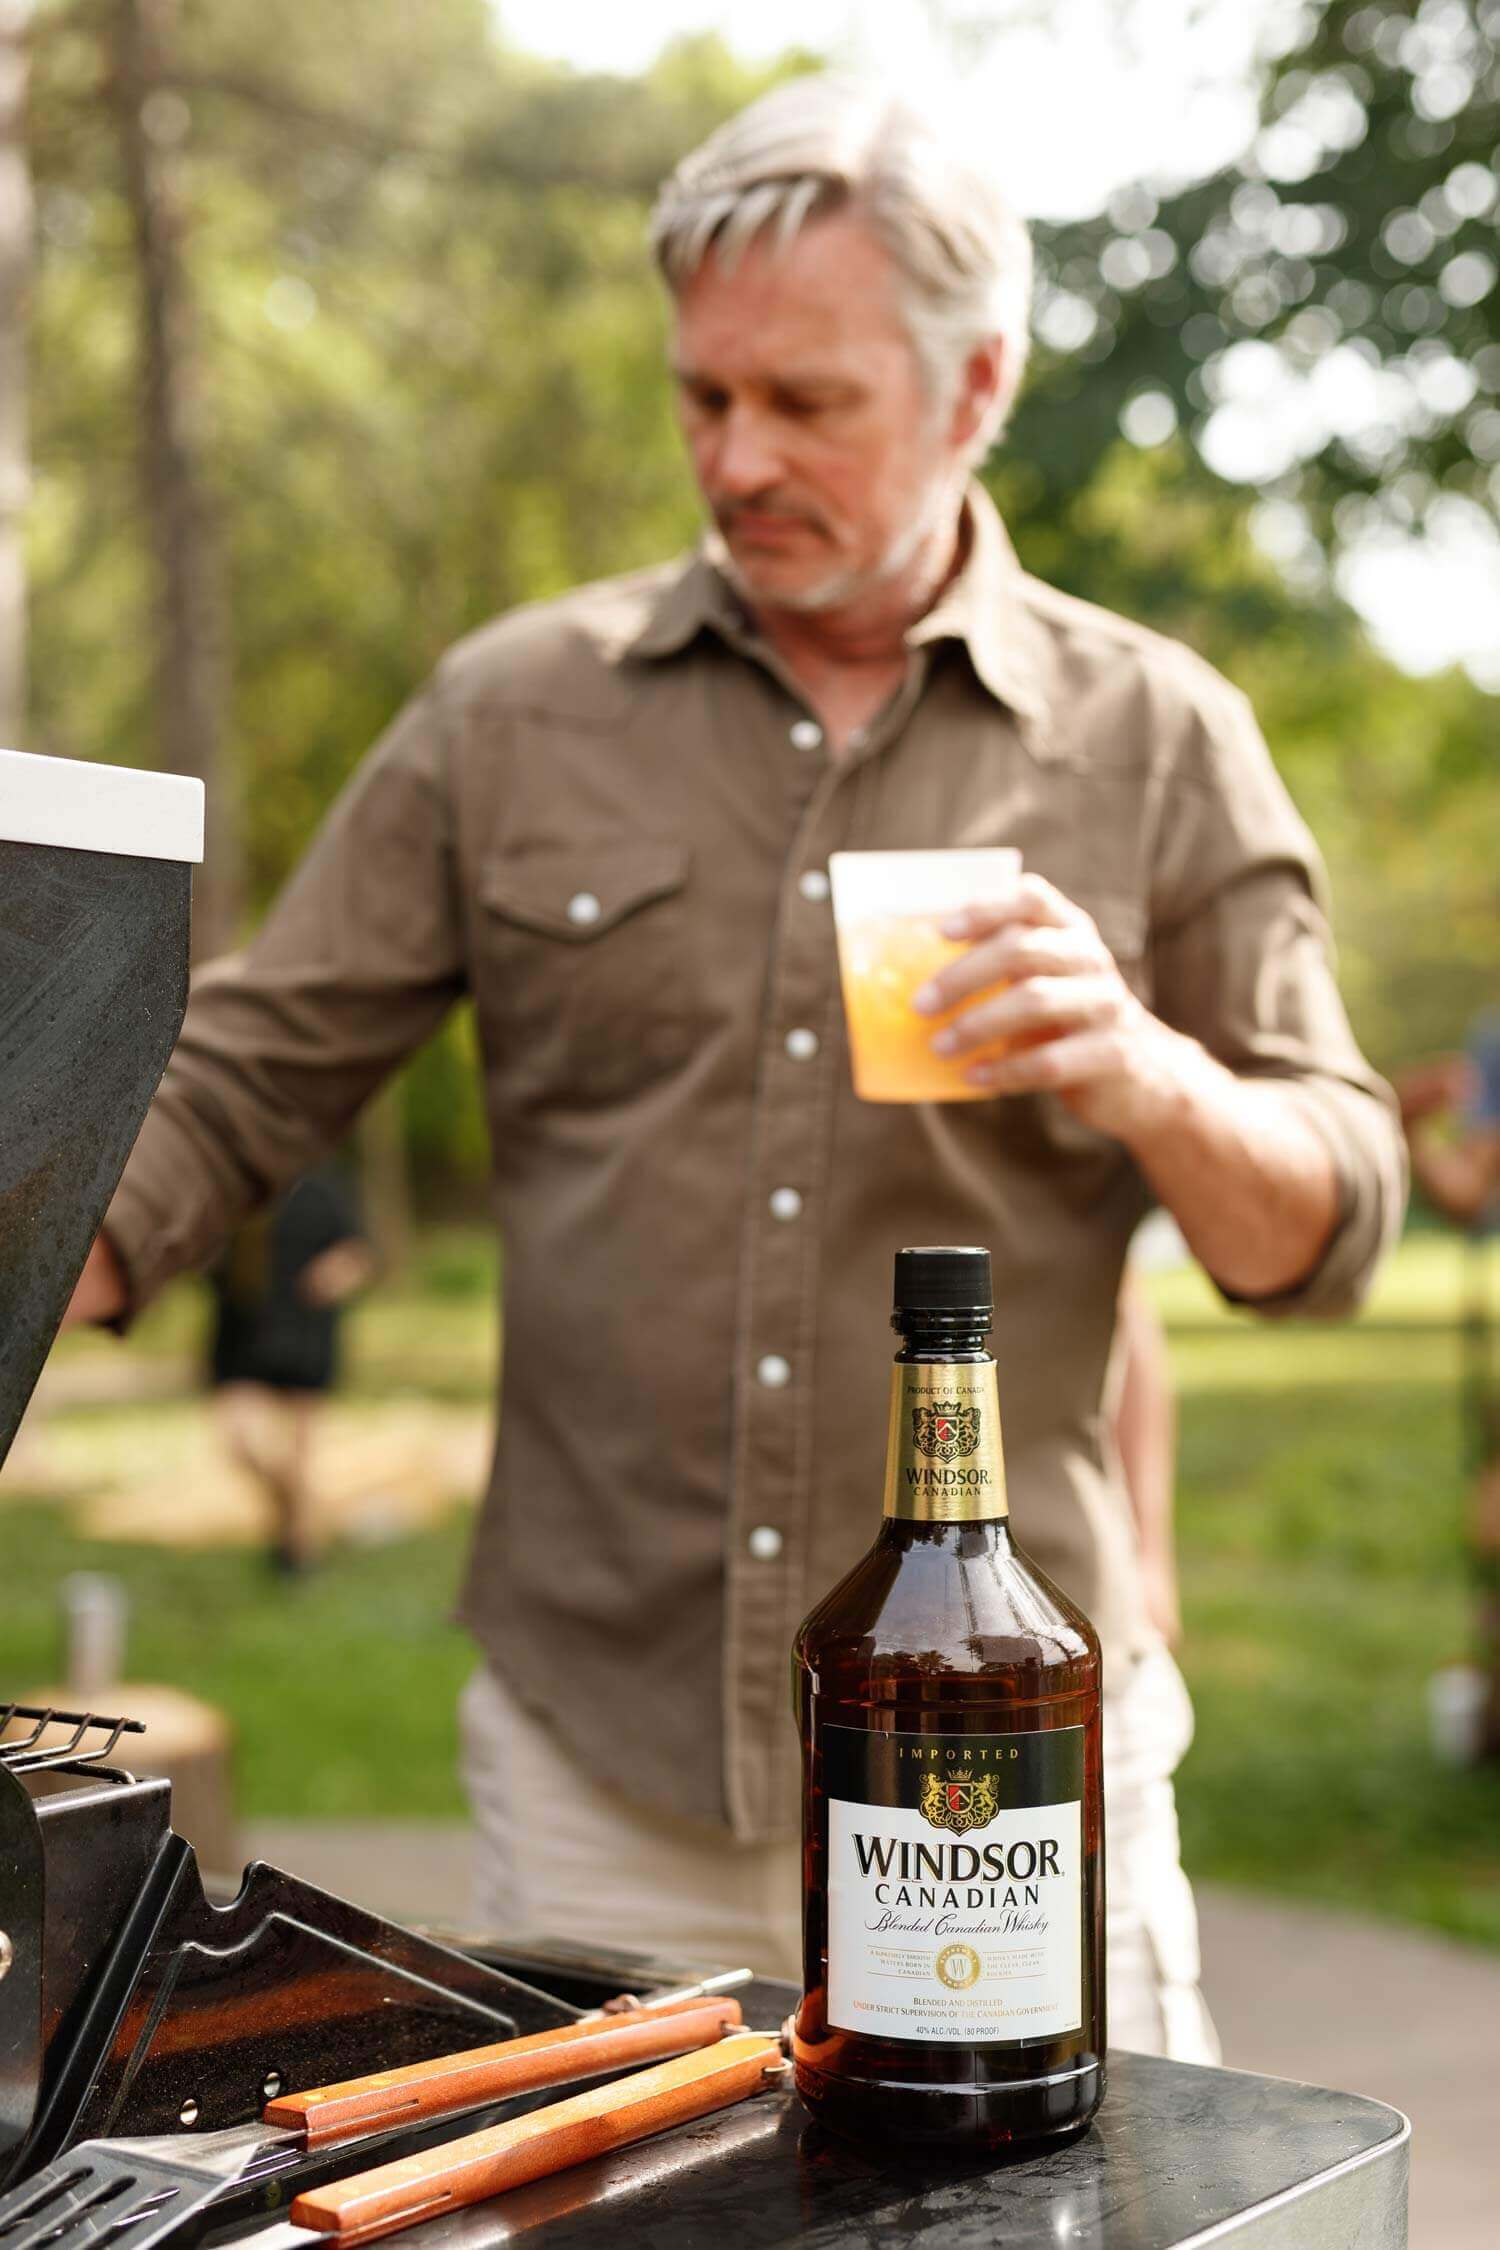 Windsor Canadian Whiskey on a grill